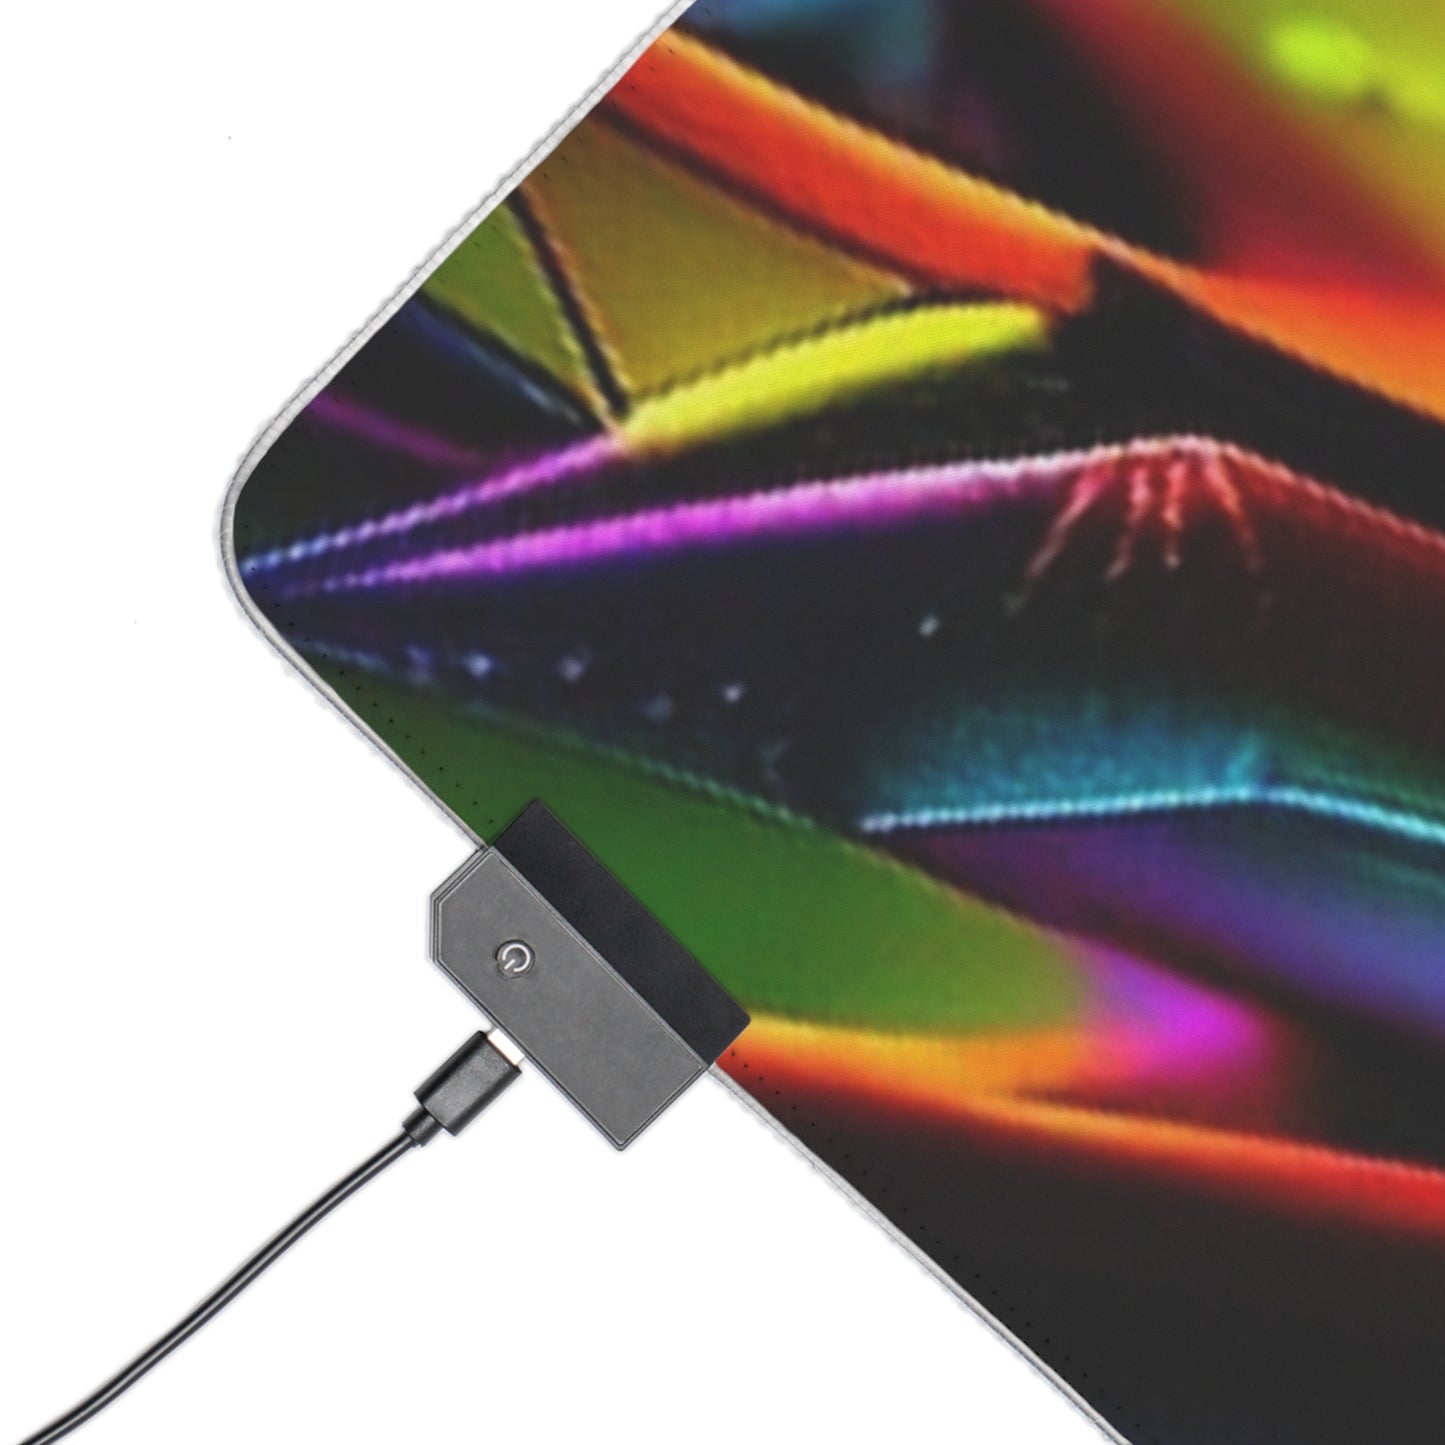 LED Gaming Mouse Pad  Macro Neon Spike 4